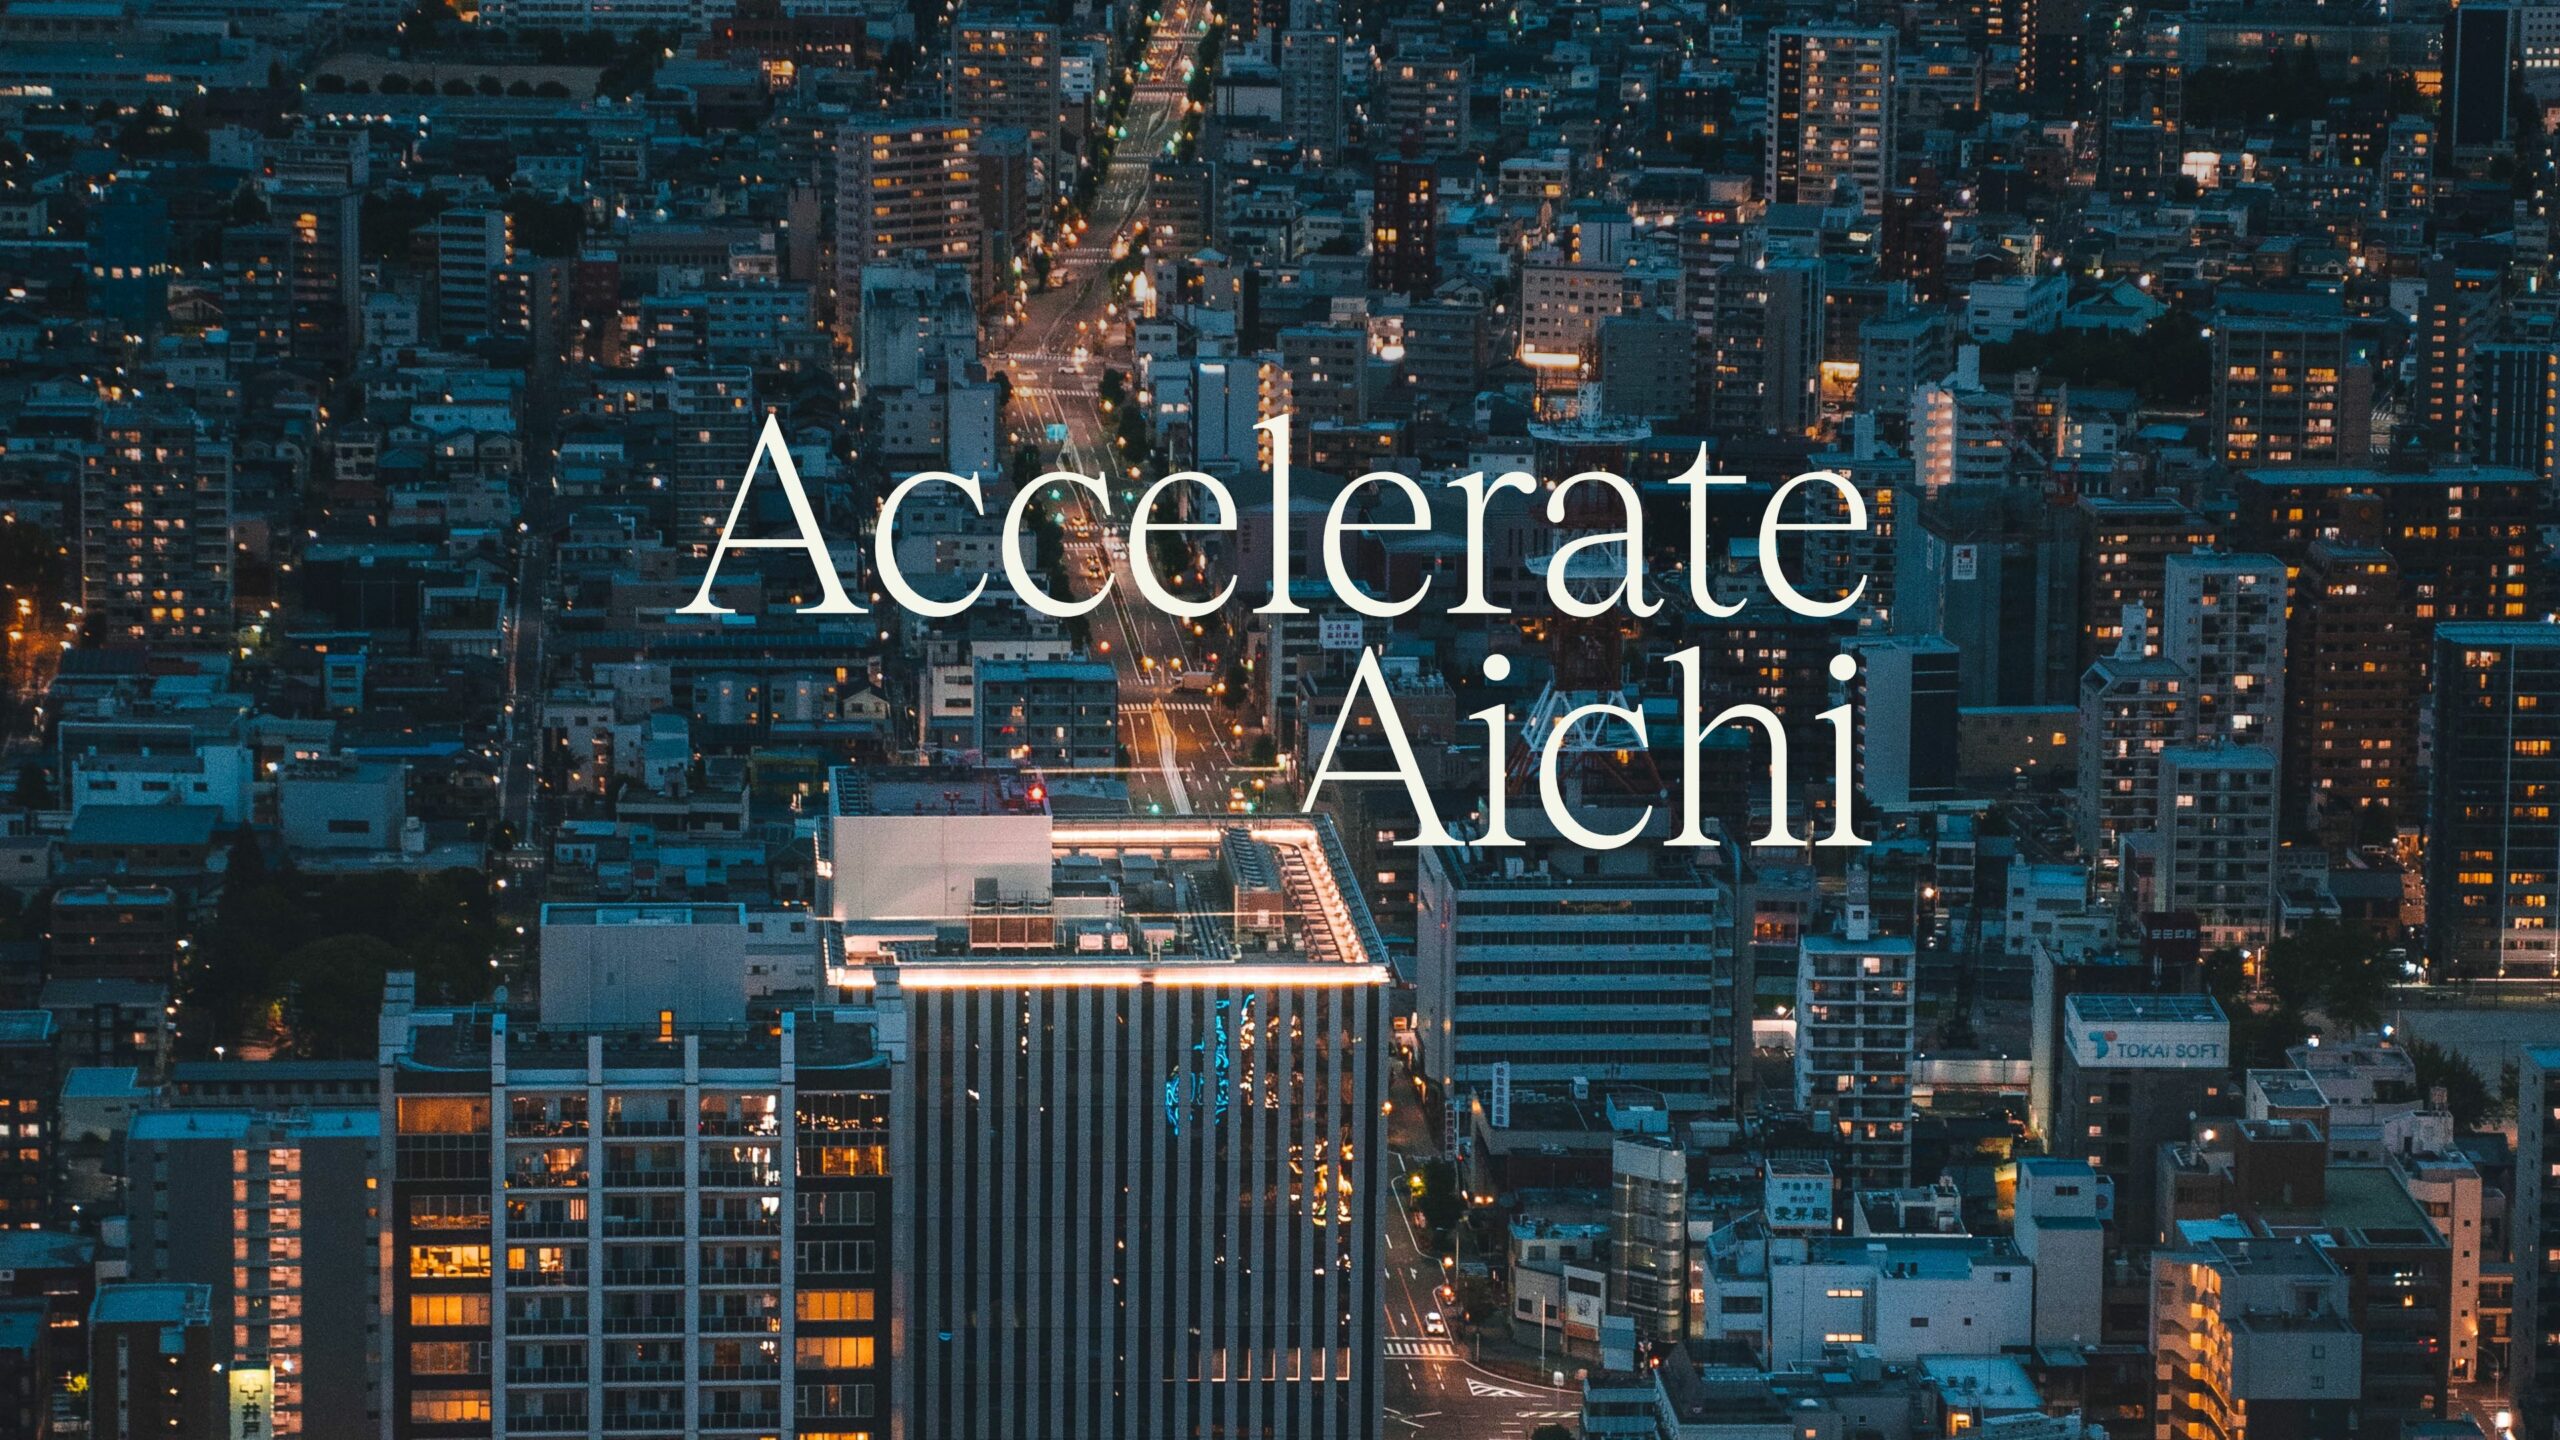 Big in Japan: How Accelerate Aichi is expanding startup growth in the country